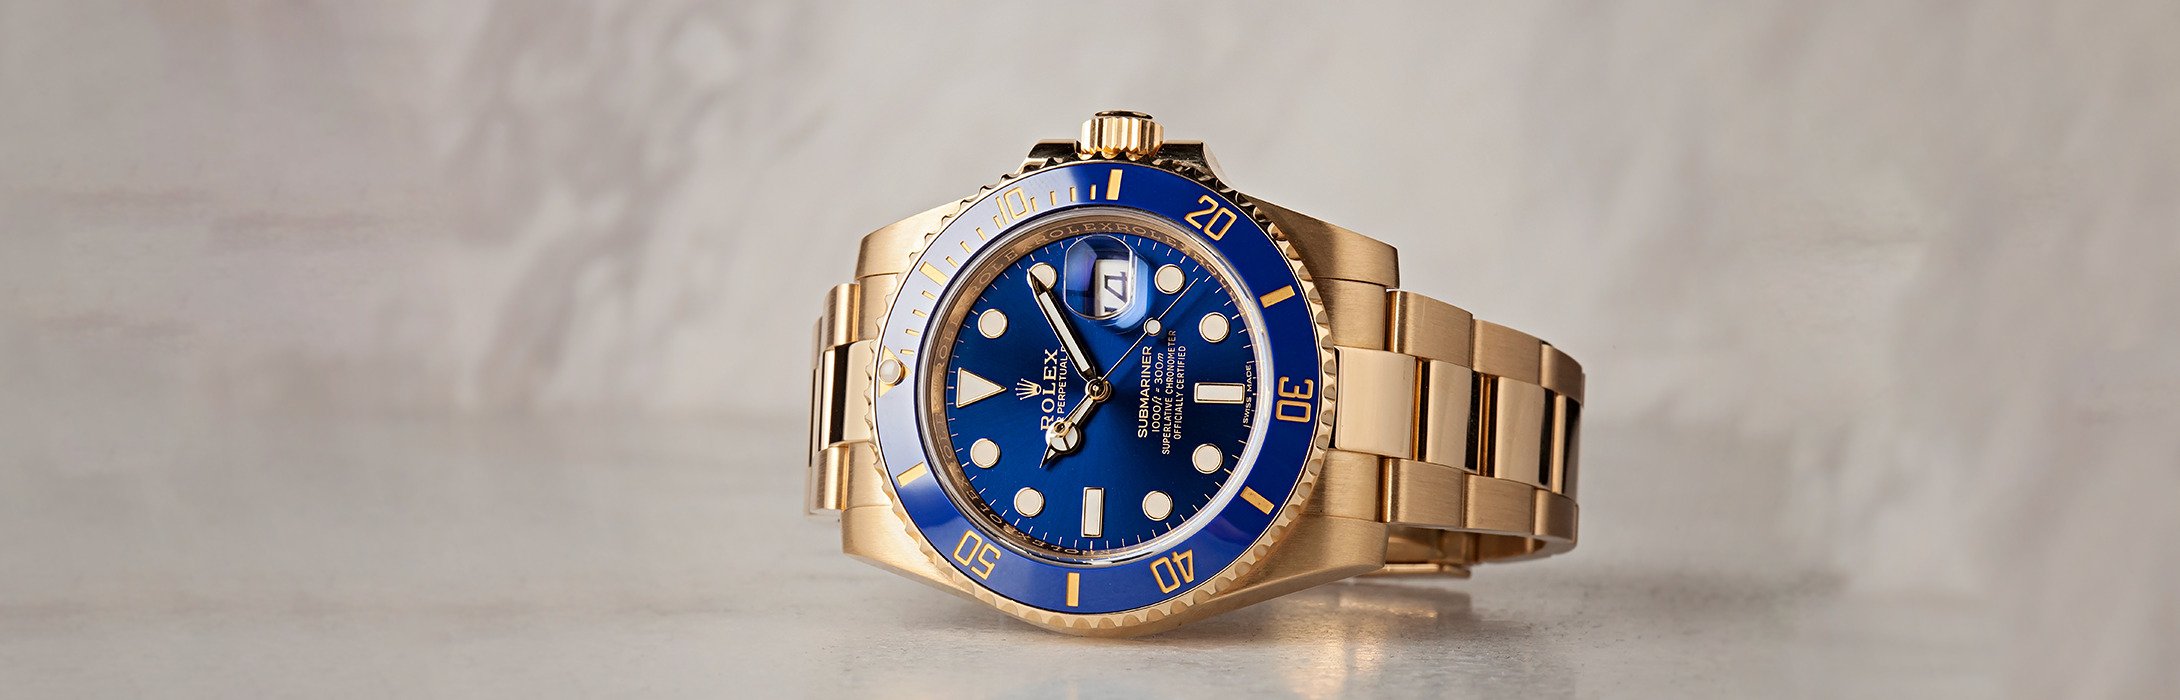 Rolex Submariner Blue Watches Review and Guide